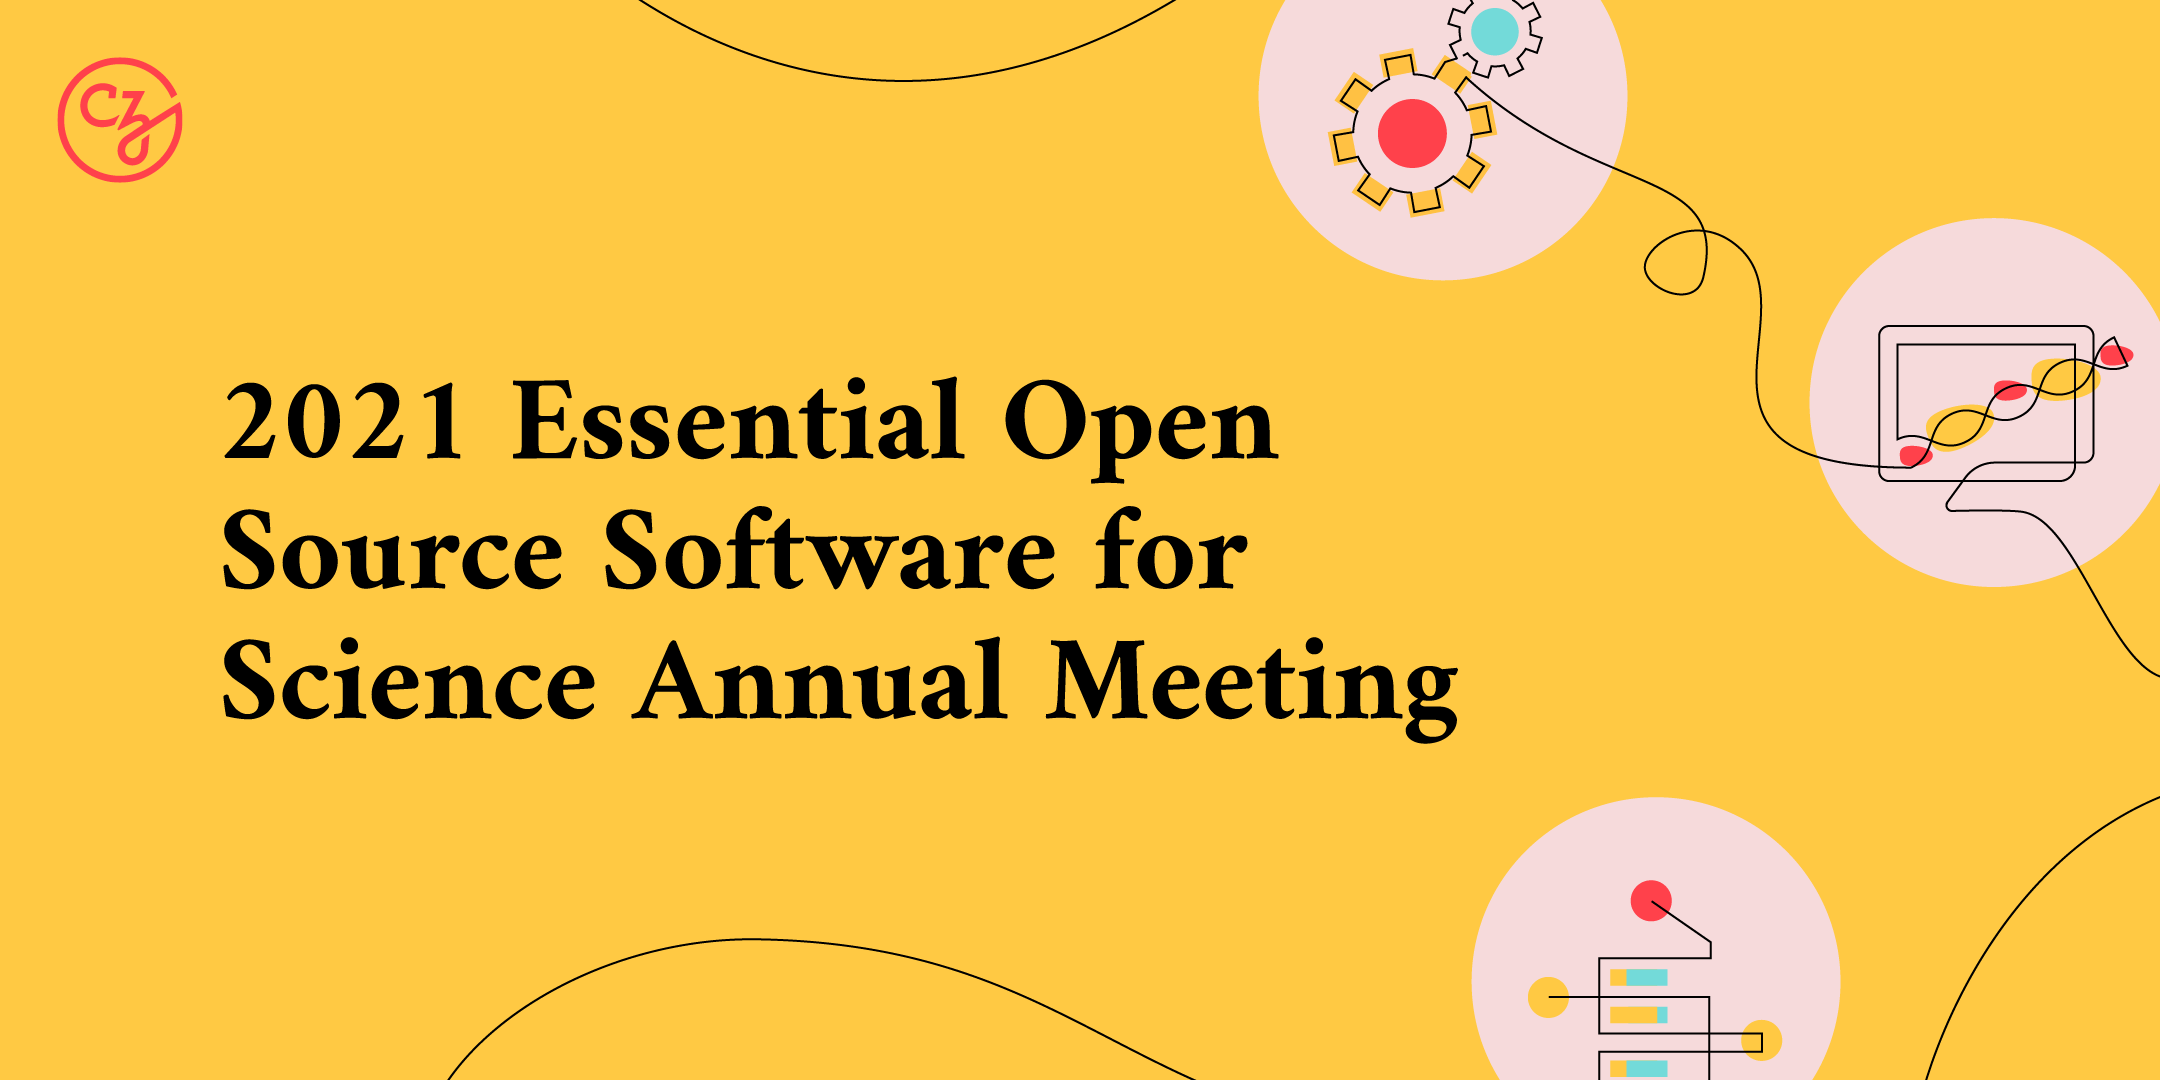 Text overlays a bright yellow background with graphical elements representing open science and reads, “2021 Essential Open Source Software for Science Annual Meeting.”